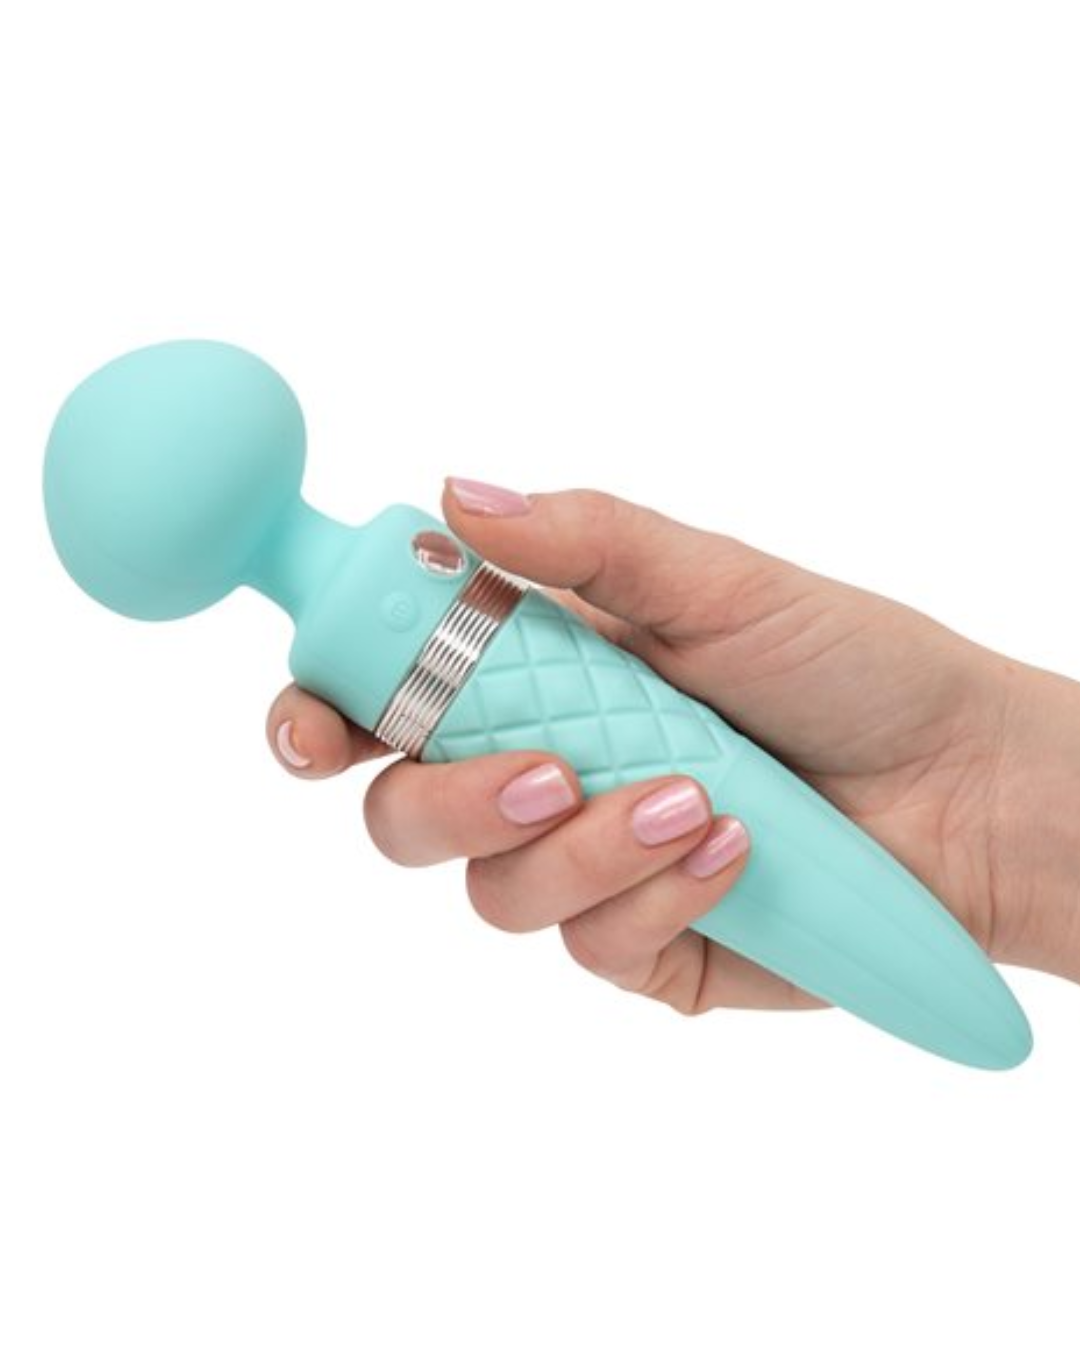 Pillow Talk Sultry Waterproof Double Ended Wand Vibrator - Teal held in a hand